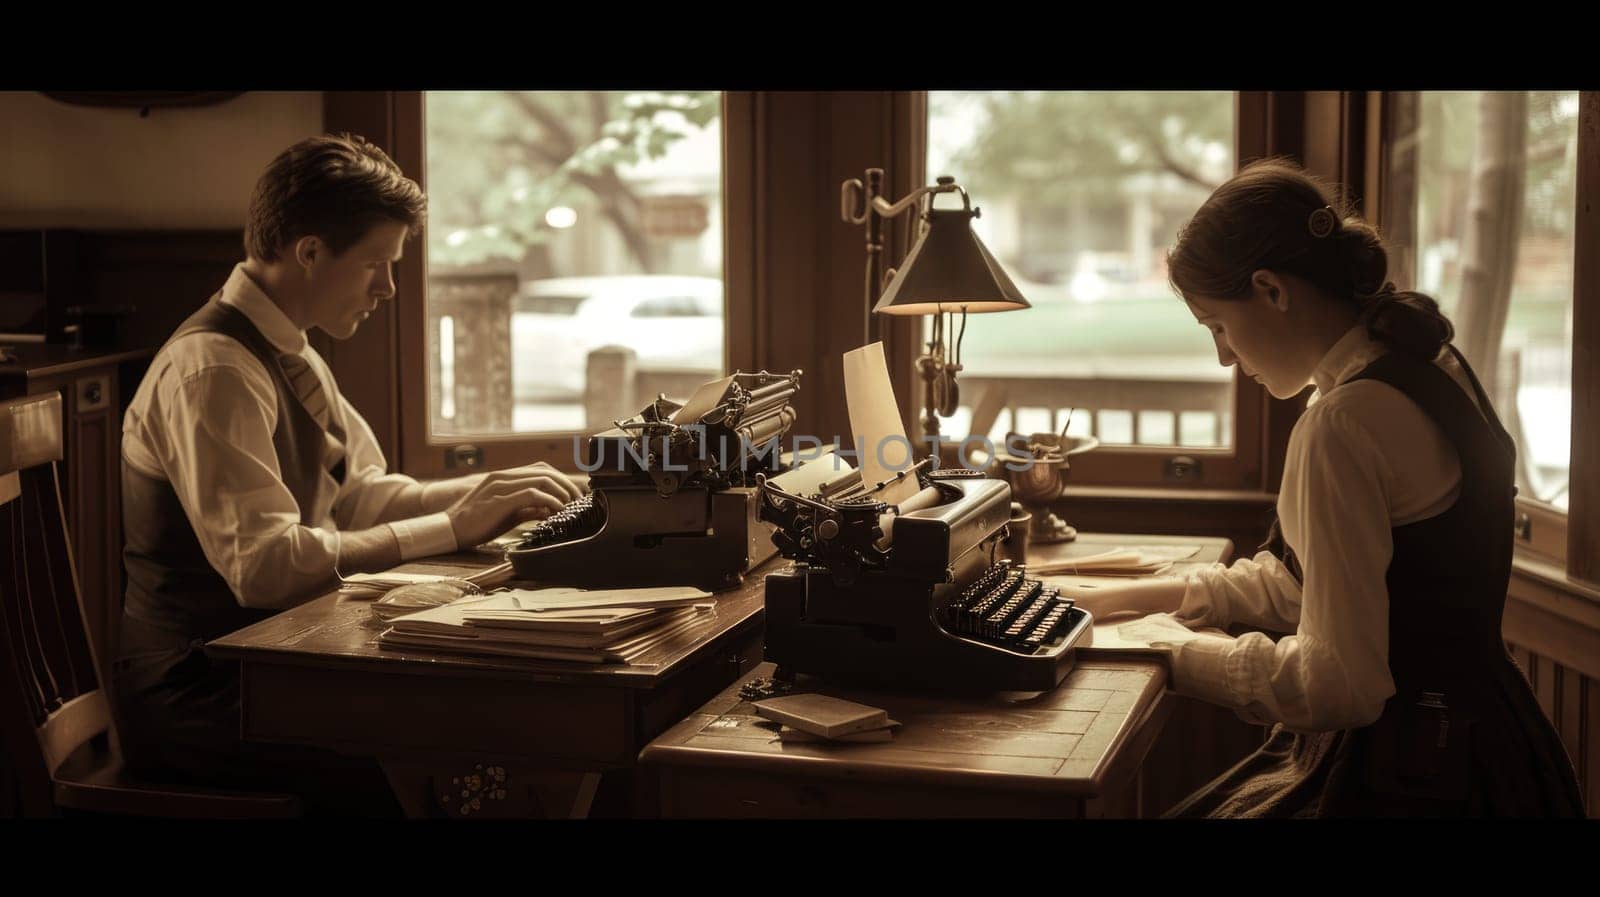 Two women sharing a table, typing on a typewriter in a building. AIG41 by biancoblue